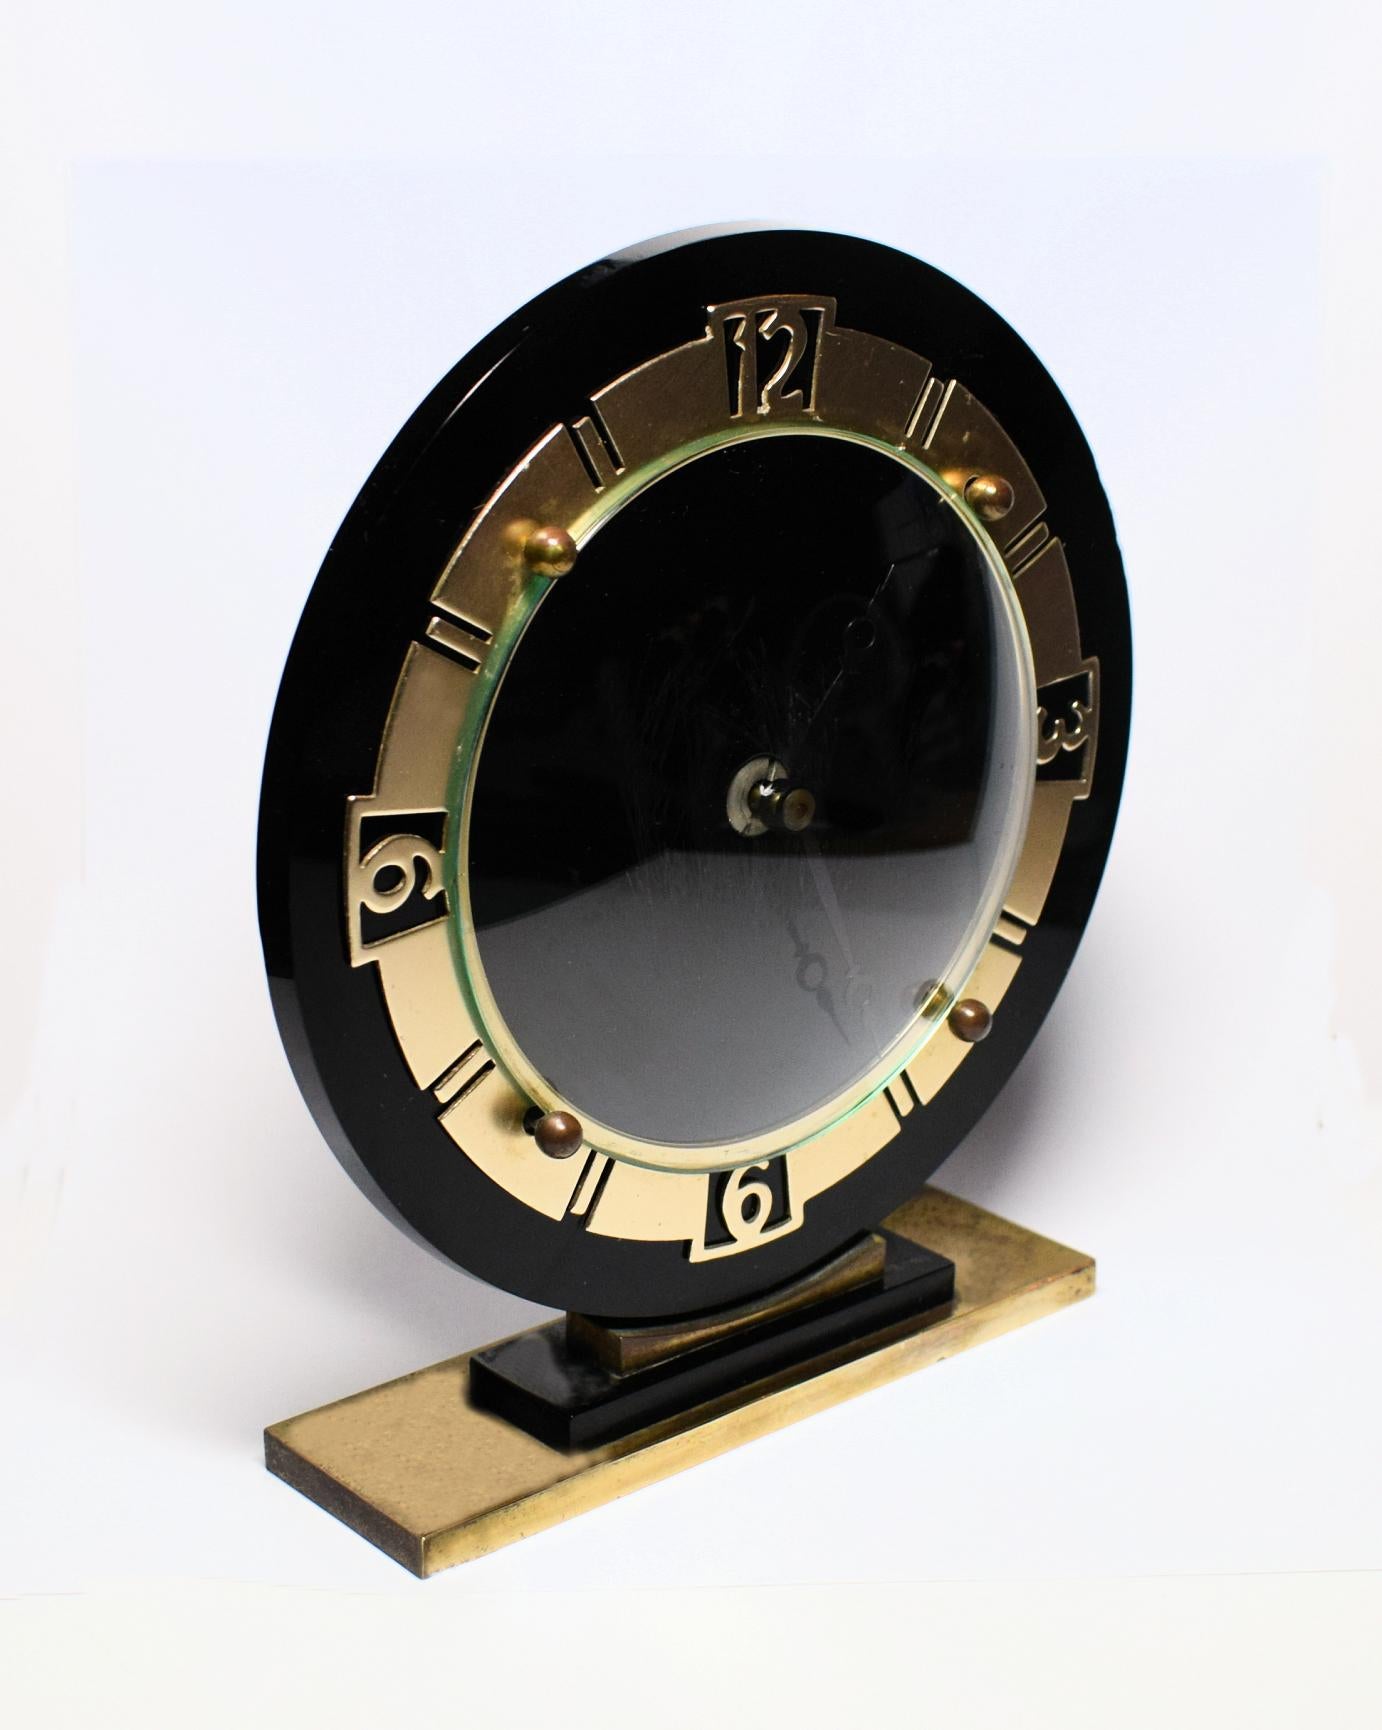 Art Deco English black glass clock dating to the 1930s. Lovely crisp and unblemished dial in a jet black vitralite glass, looks very impressive and ideal for most areas including mantle and desk. Gold tone bezel and plinth. Wind up movement which